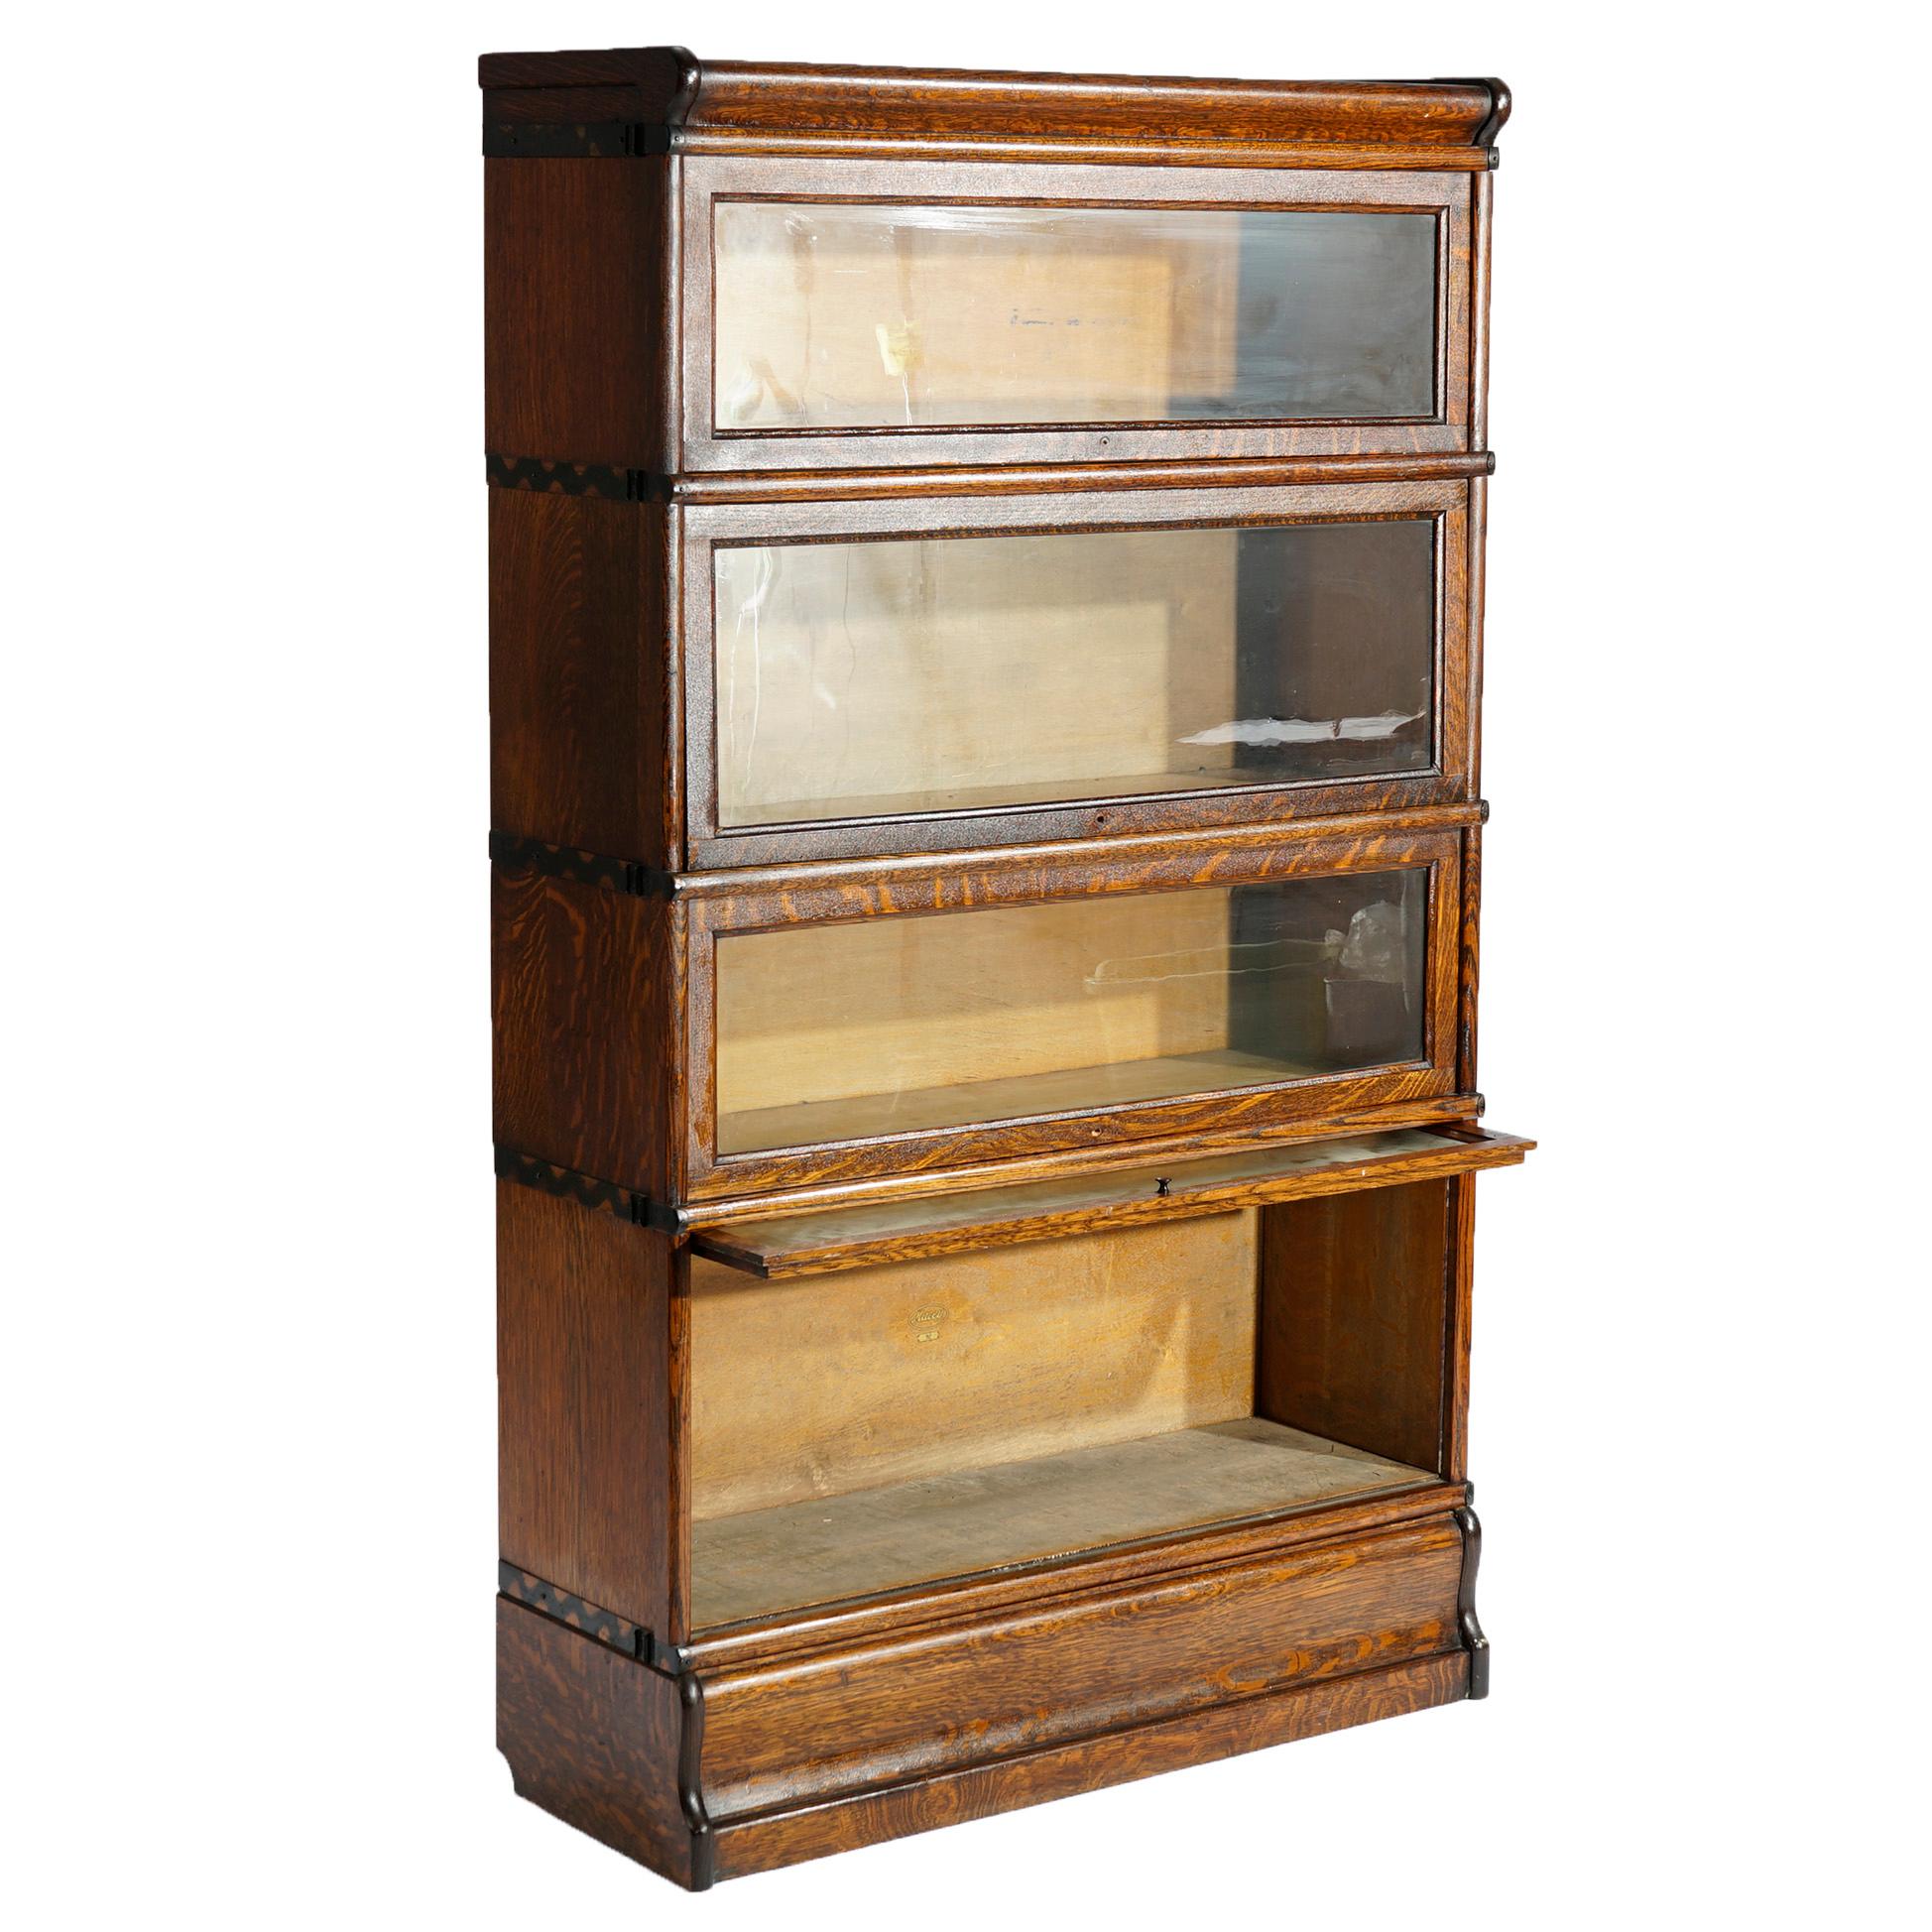 An antique Arts and Crafts Mission barrister bookcase attributed to Macey offers quarter sawn oak construction with four stacks, each having pull-out glass doors, seated on ogee base, circa 1910

Measures- 58.25'' H x 34.25'' W x 12.25''